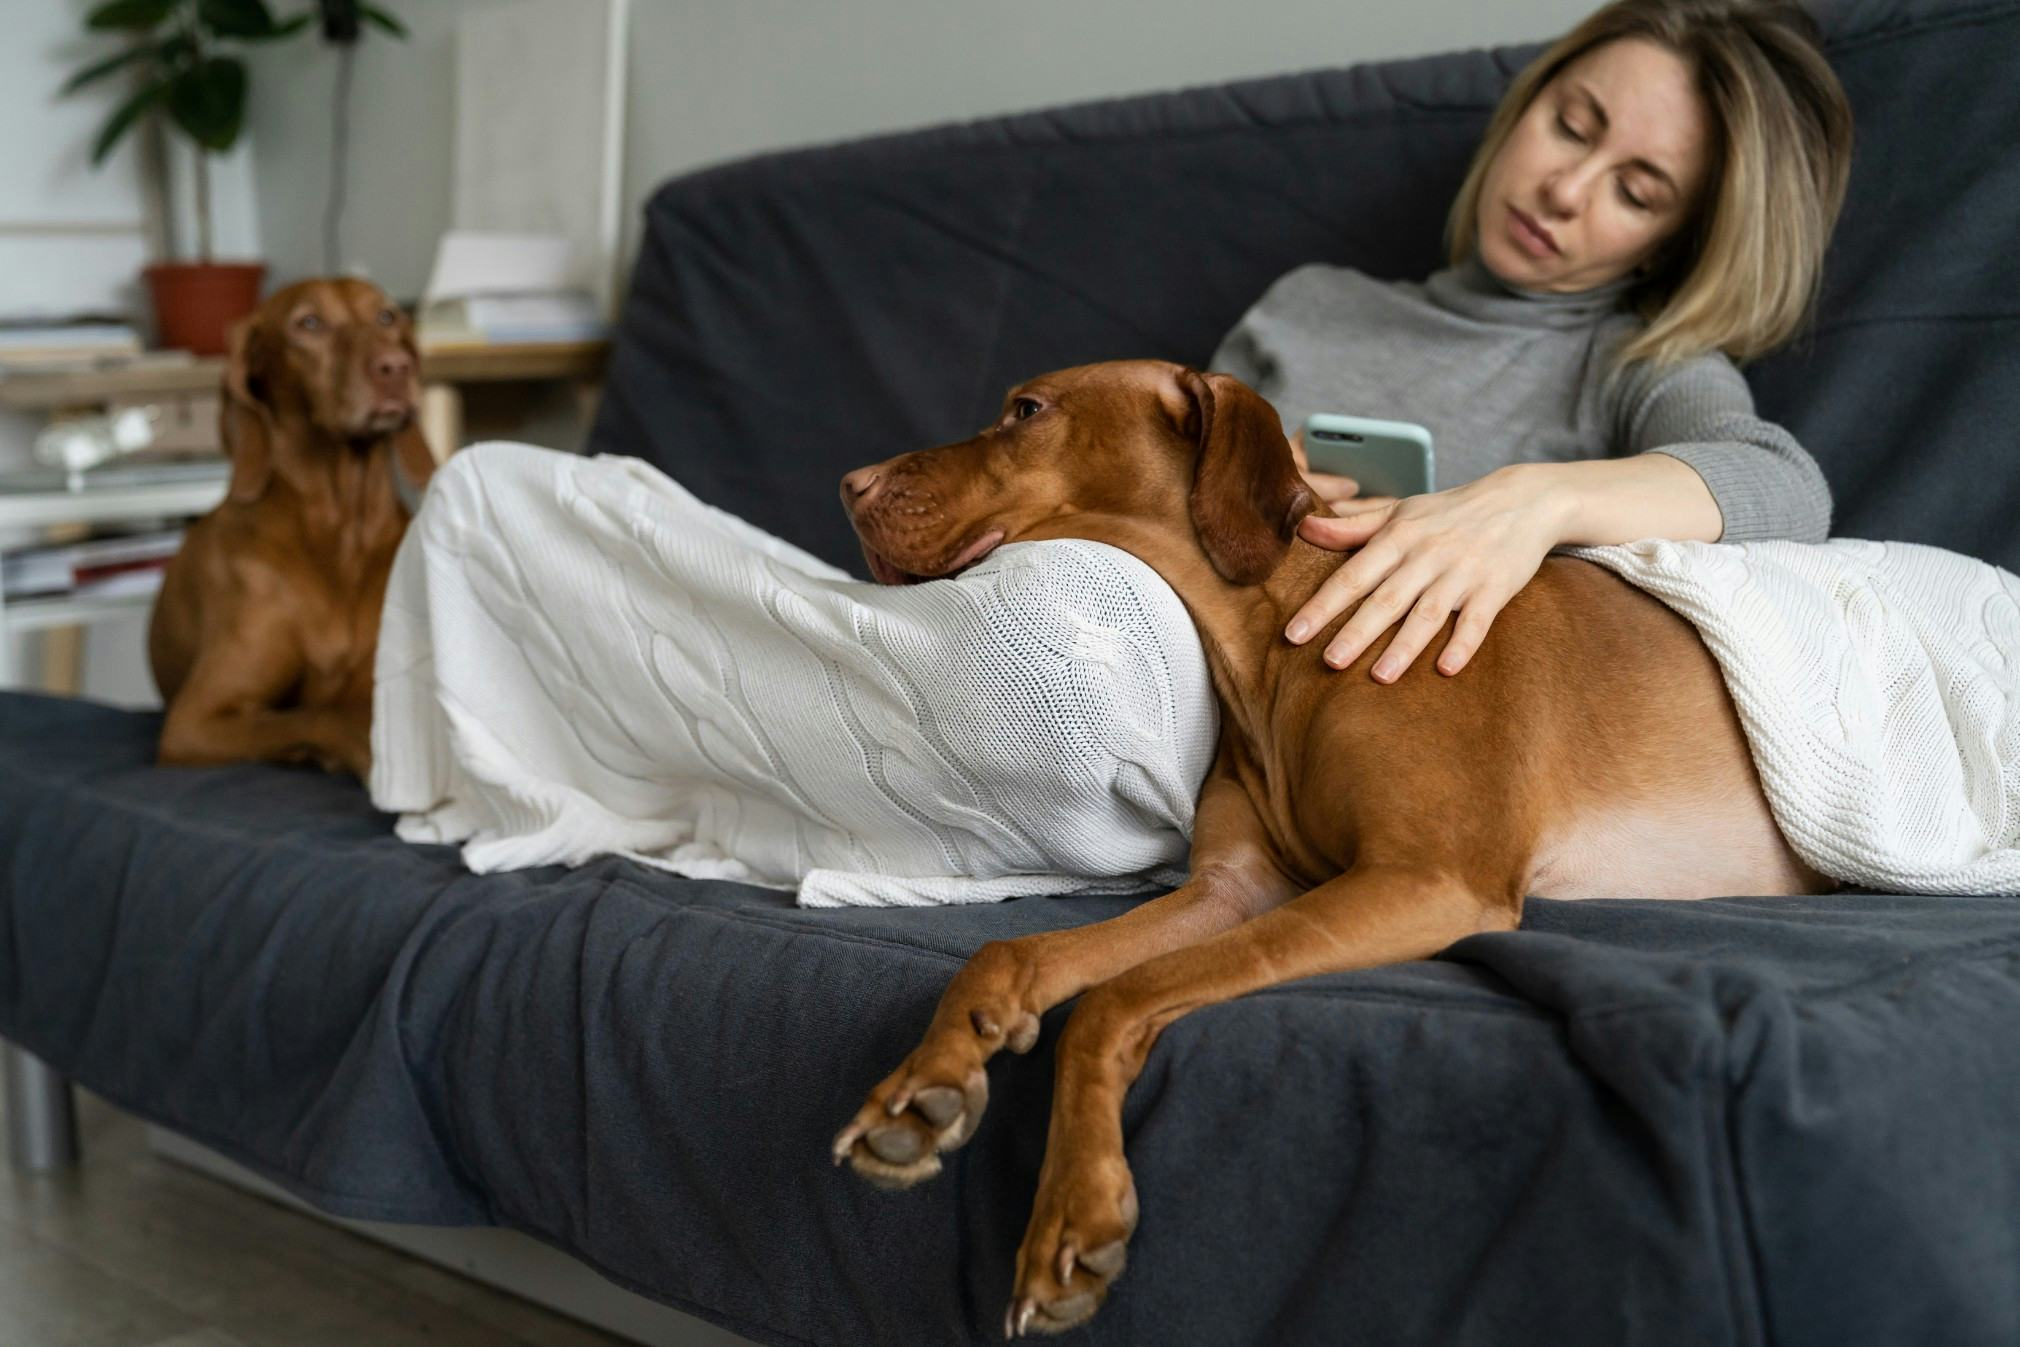 Woman sitting on a couch with a blanket on her legs looking at her phone with two dogs next to her, one laying on her lap.